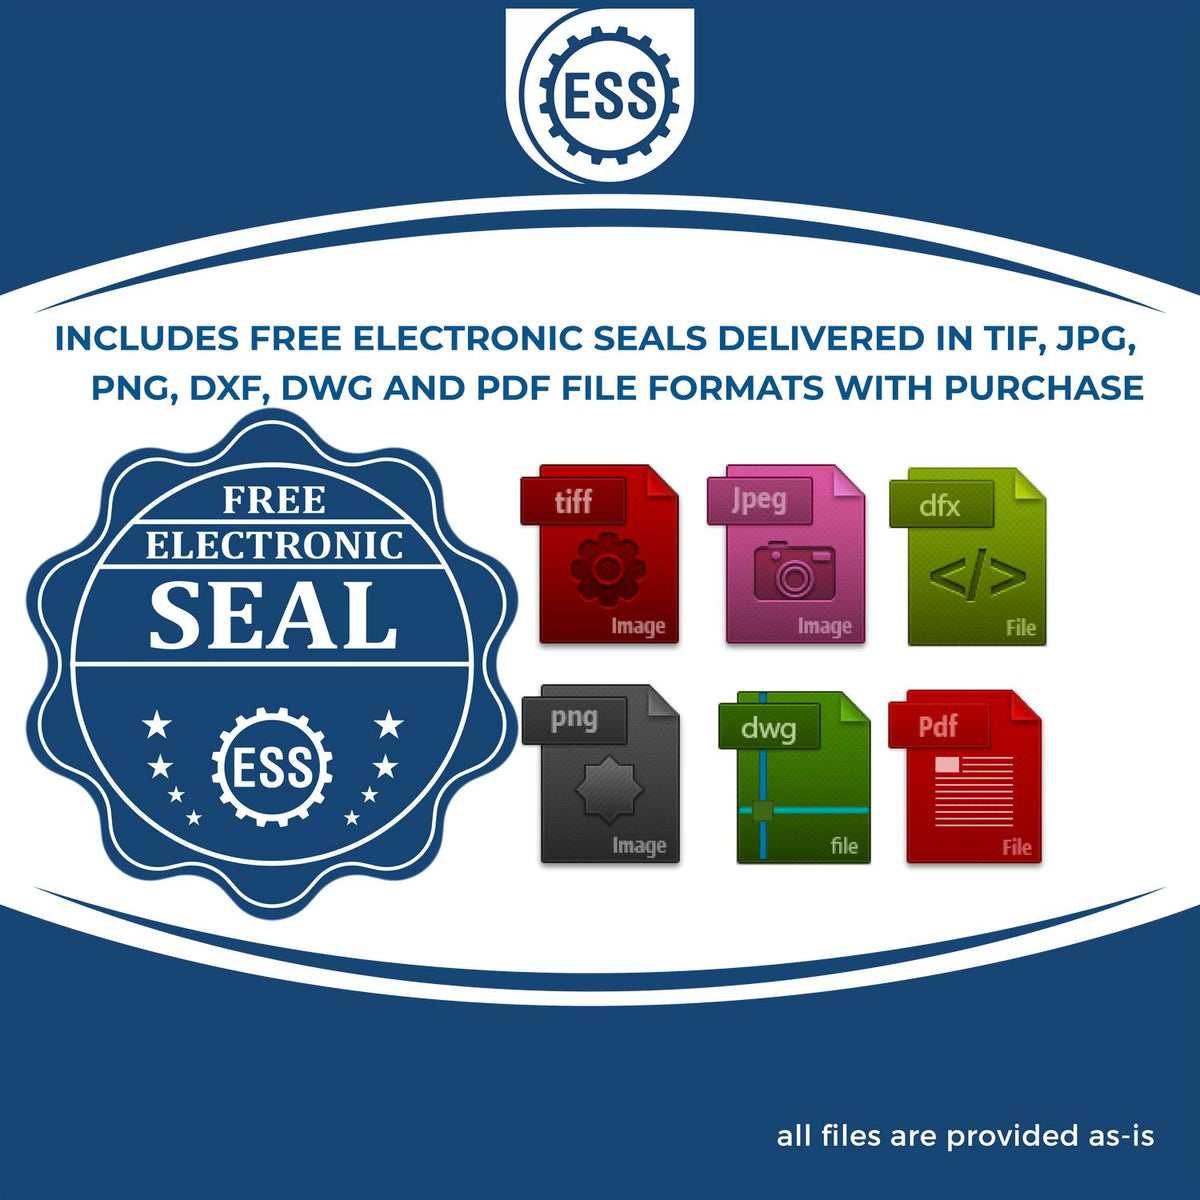 An infographic for the free electronic seal for the Wooden Handle Arizona State Seal Notary Public Stamp illustrating the different file type icons such as DXF, DWG, TIF, JPG and PNG.